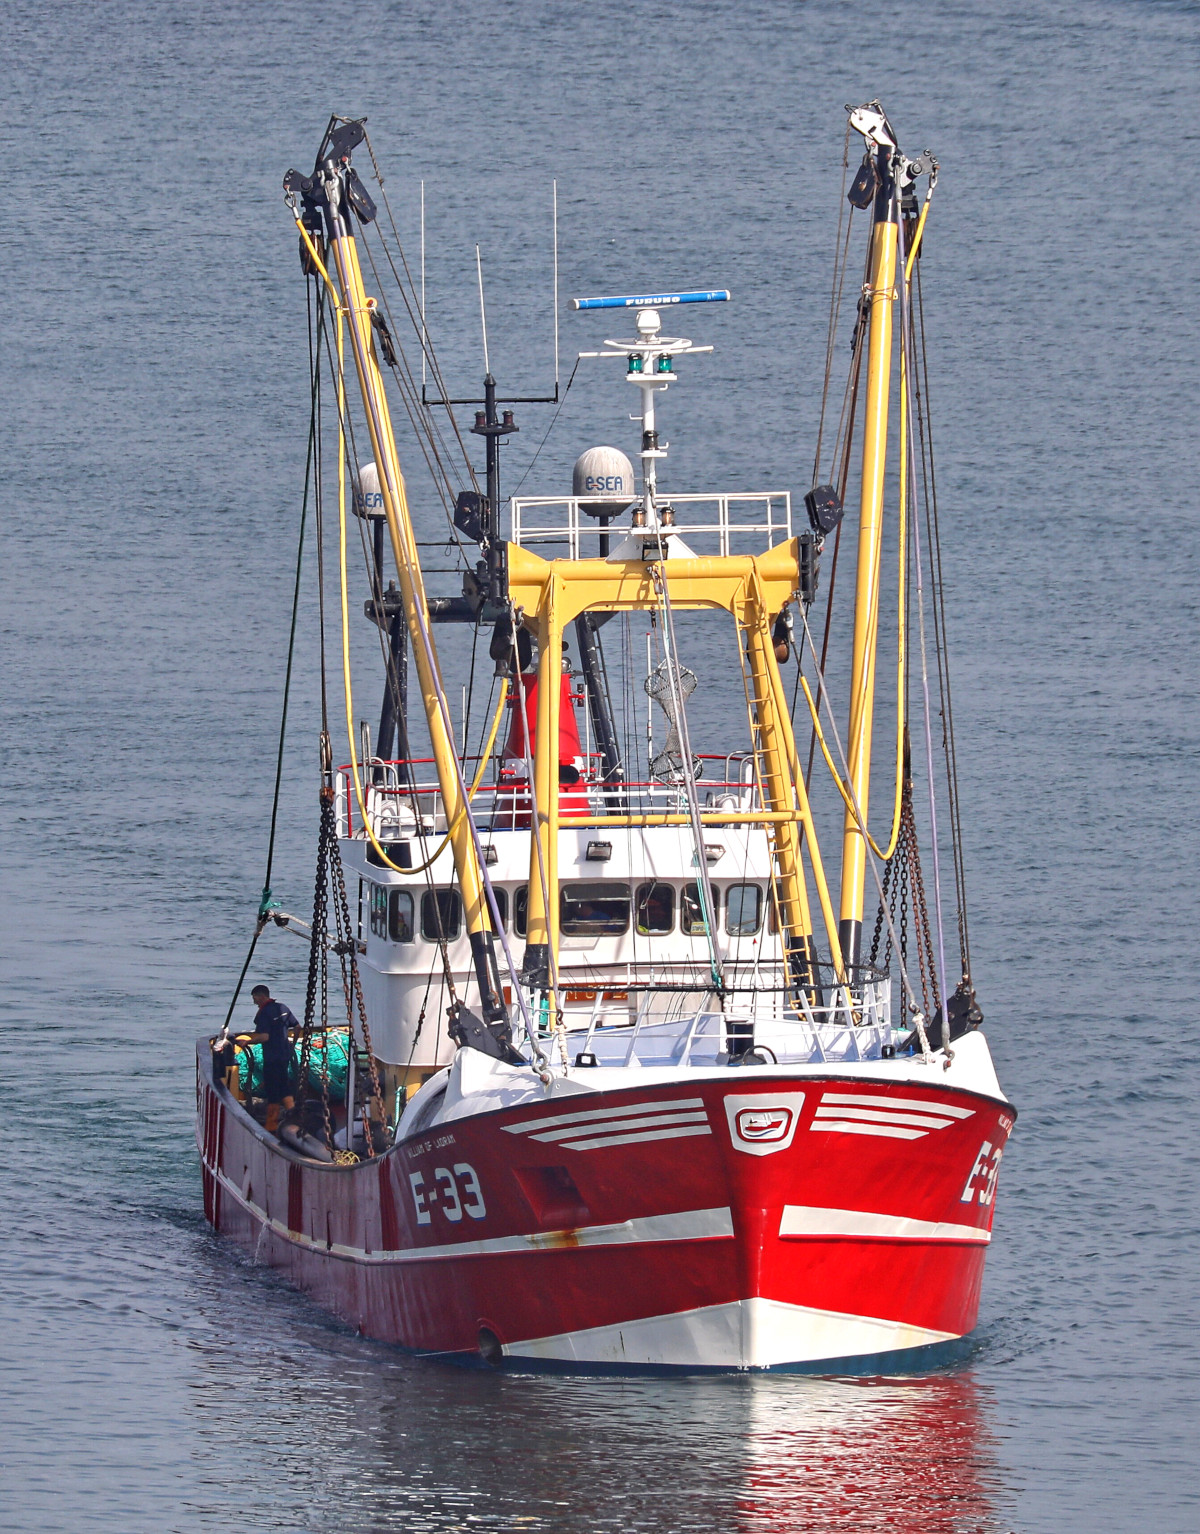 William of Ladram returning to Brixham at the end of another beam trawling trip. (Alan Letcher)